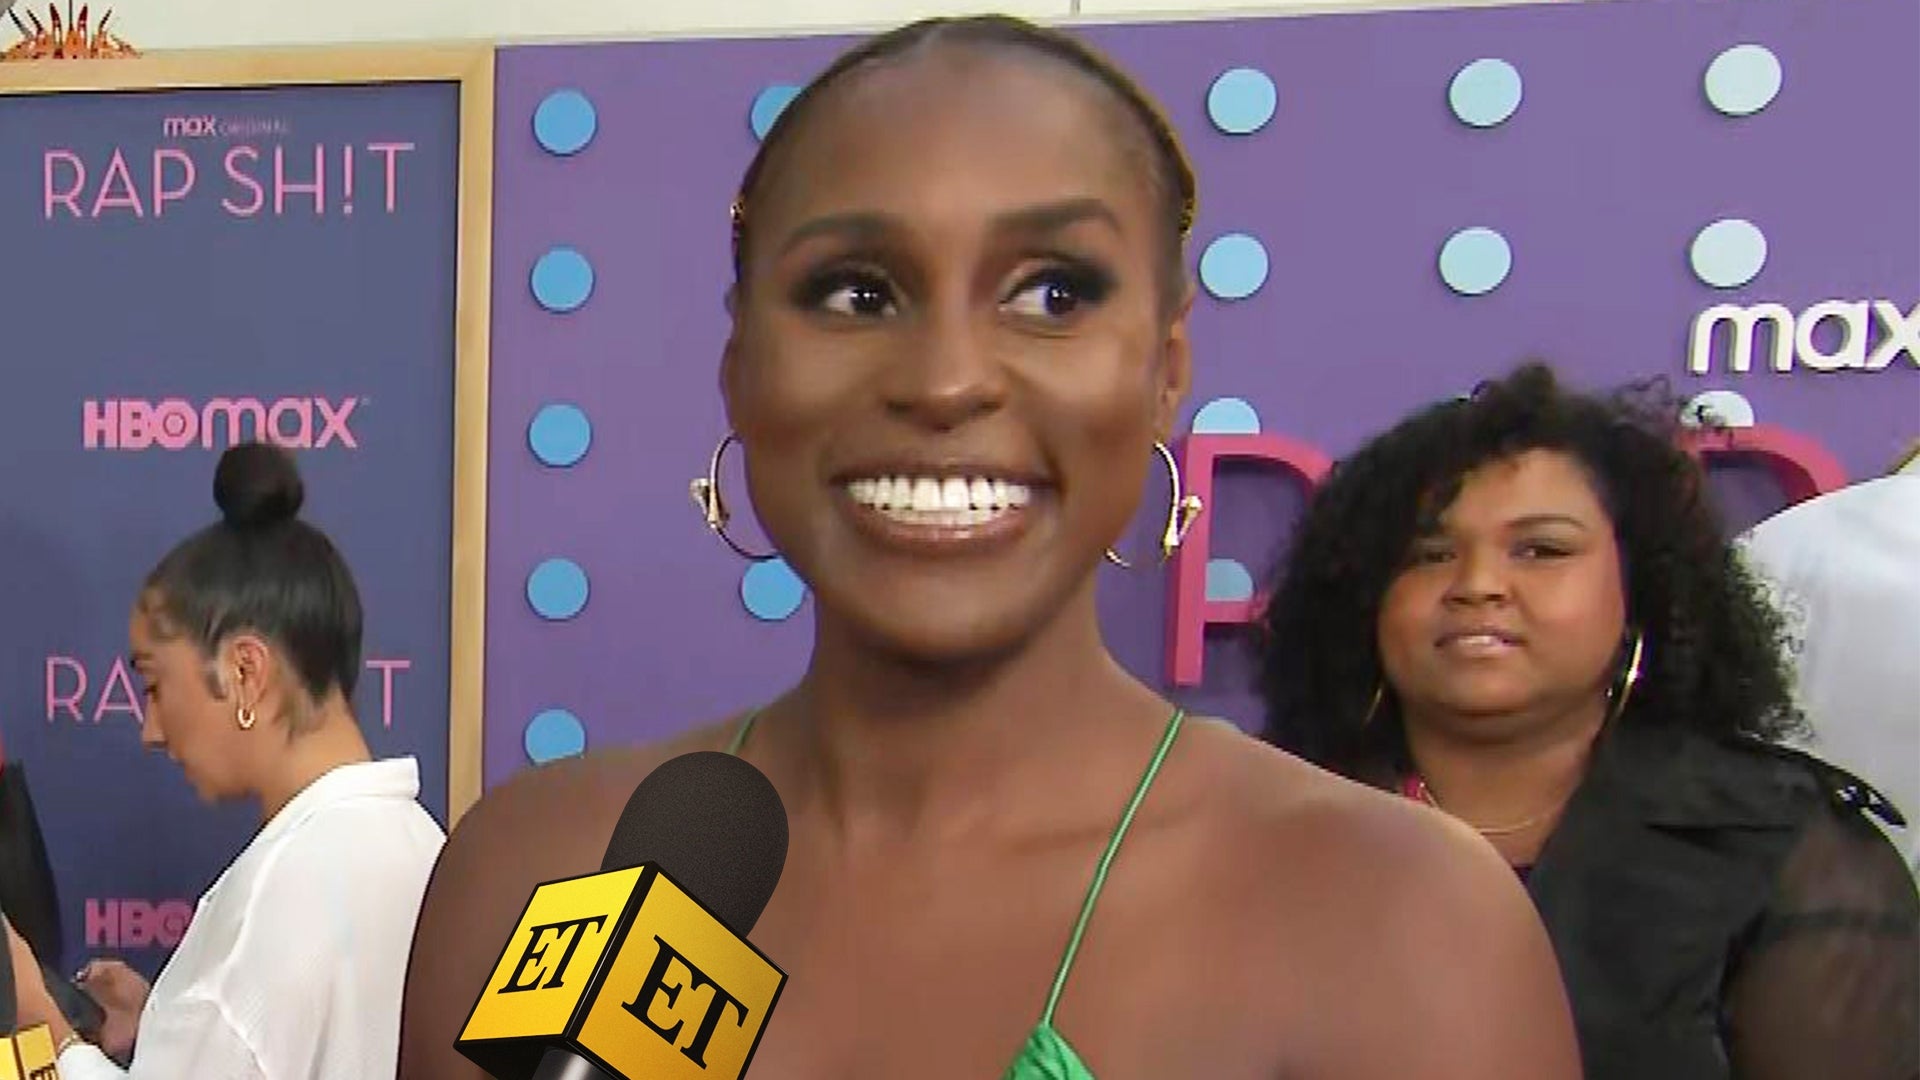 Issa Rae Says Cardi B and the City Girls Inspired ‘Rap Sh!t’ (Exclusive) 